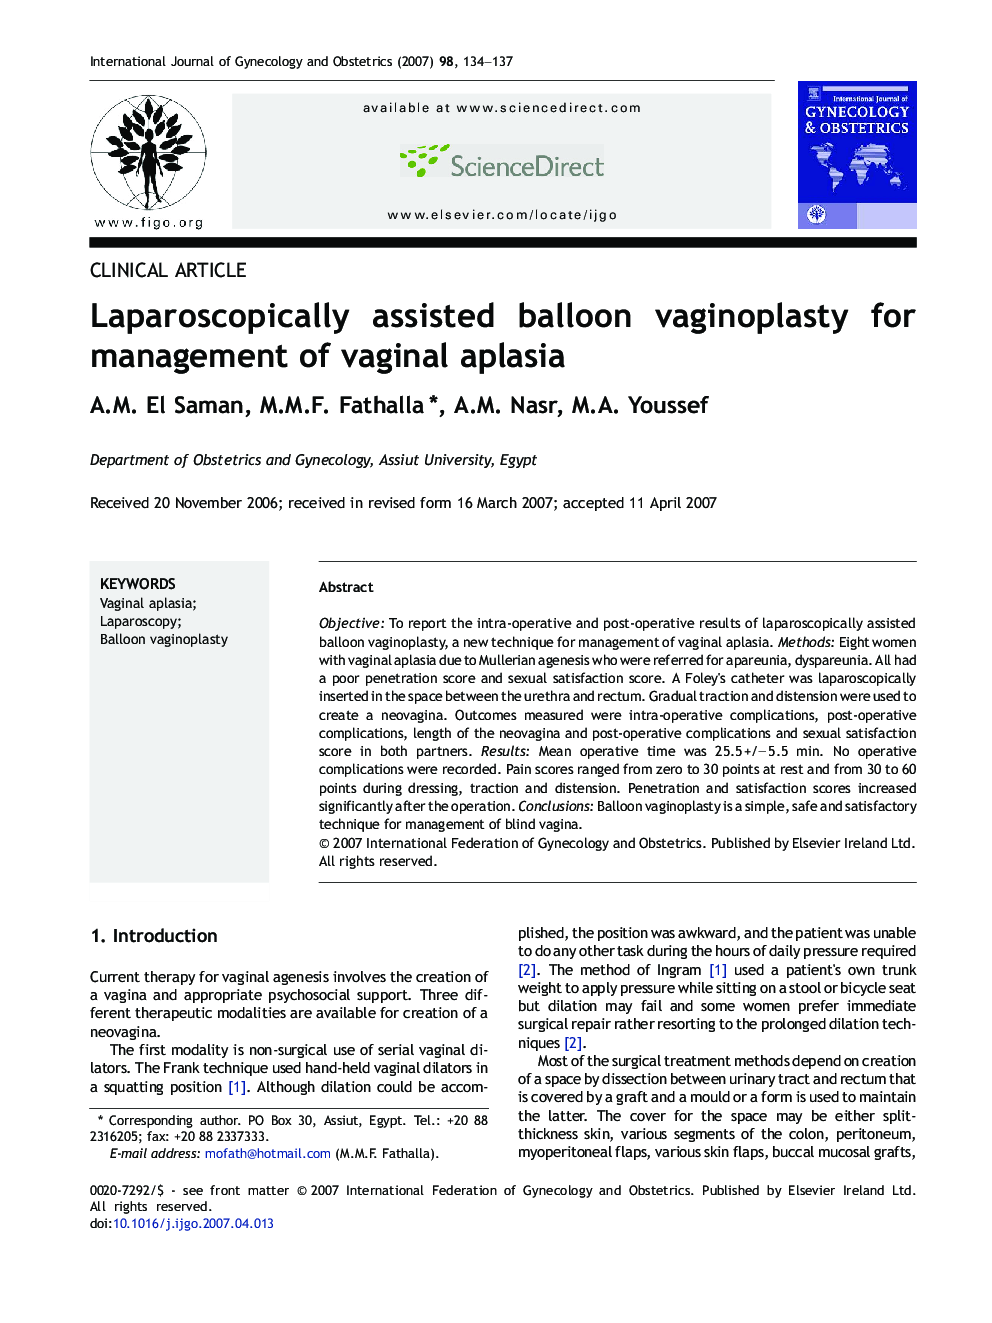 Laparoscopically assisted balloon vaginoplasty for management of vaginal aplasia